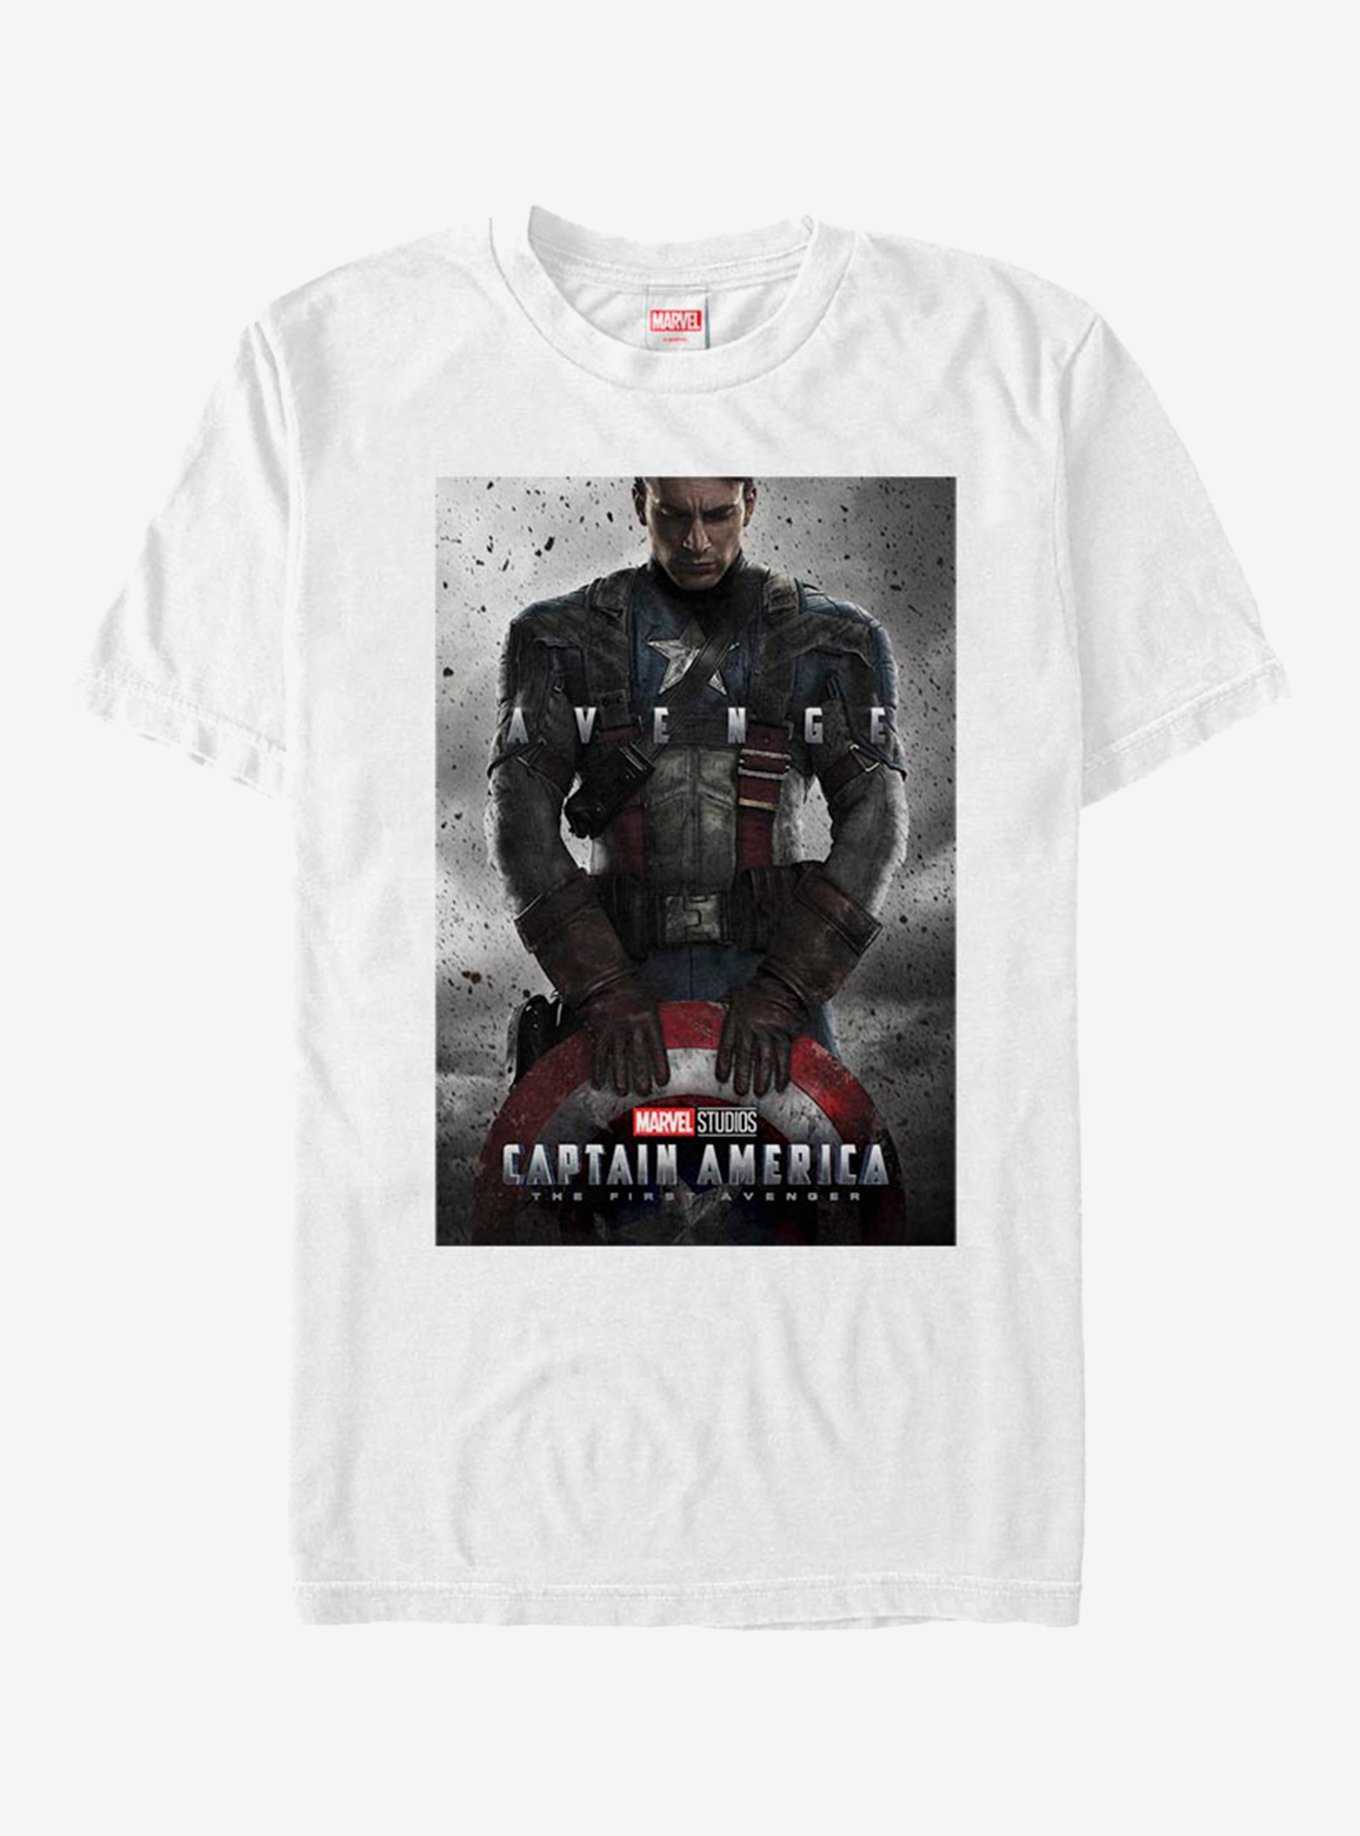 OFFICIAL Captain America Shirts, & Clothing Topic Hot Merchandise 